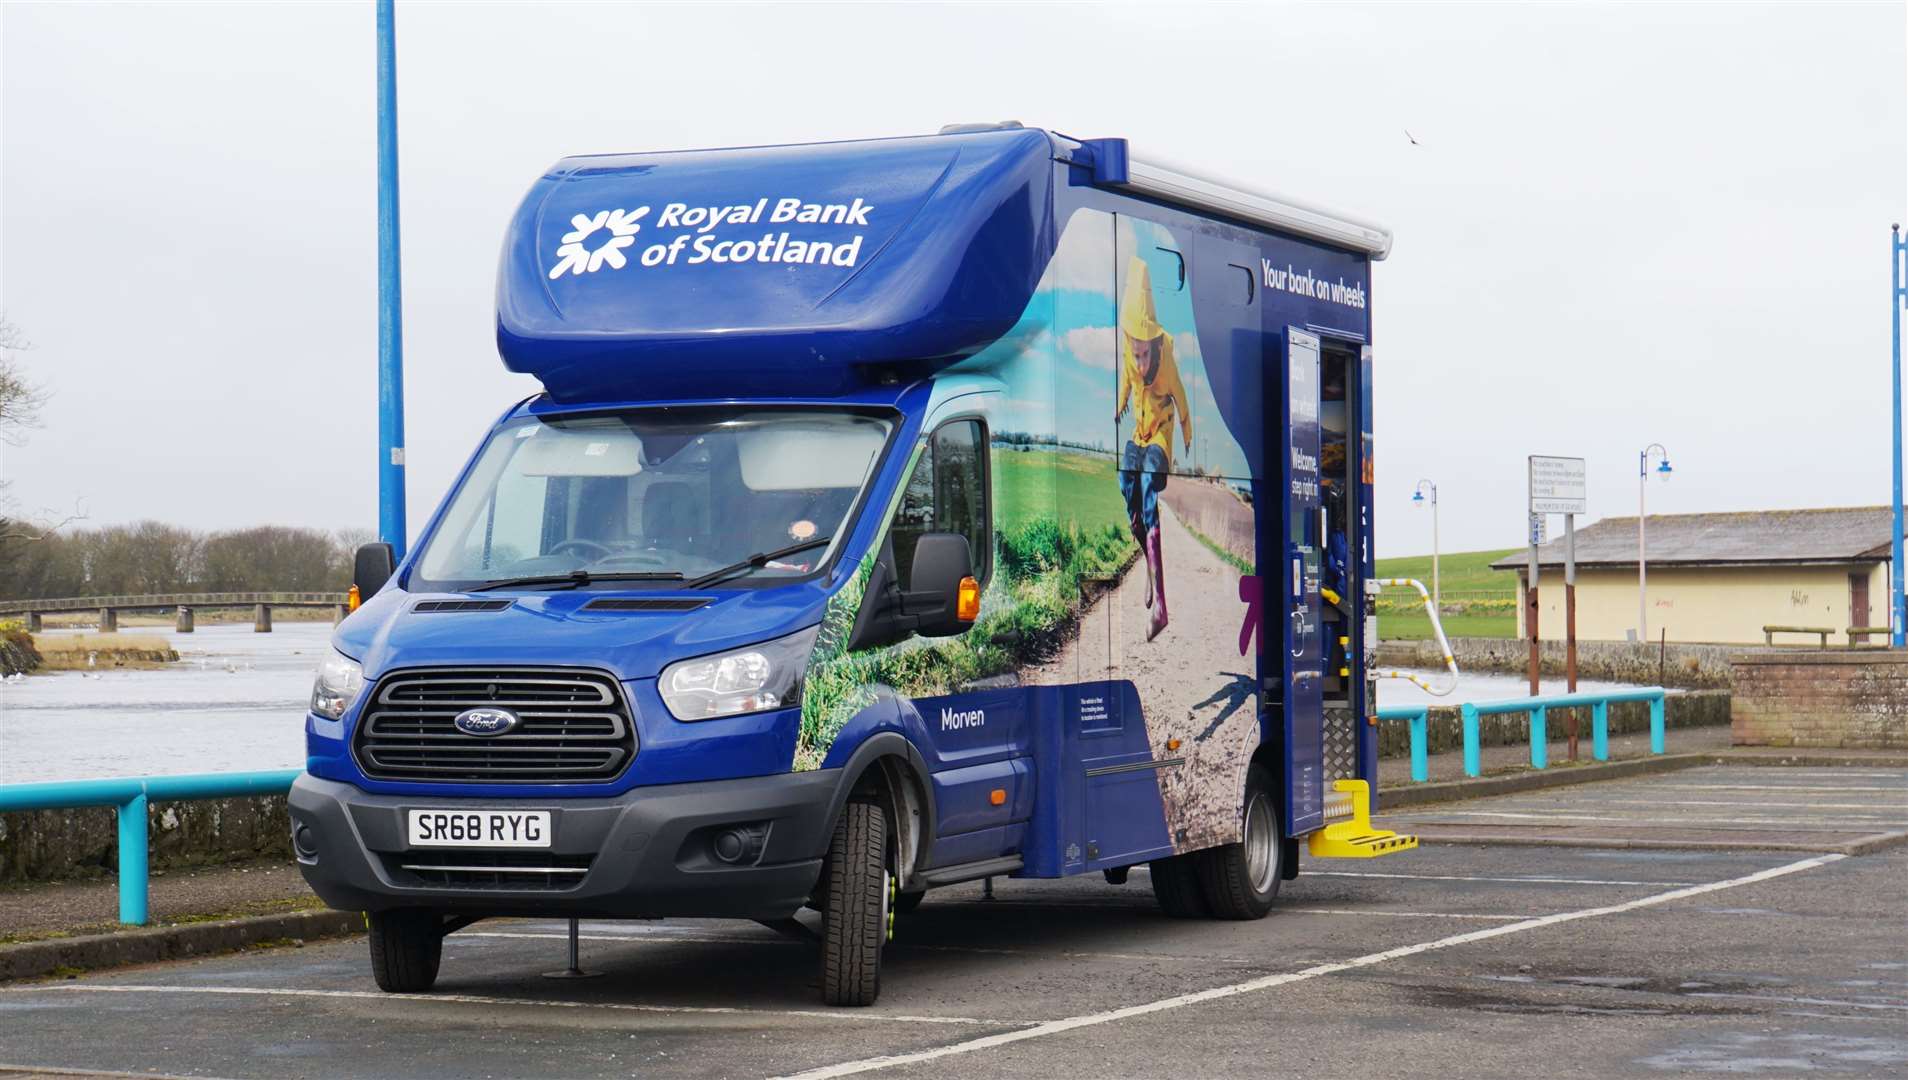 Customers in Banffshire have been calling for a return of the RBS mobile banking services.